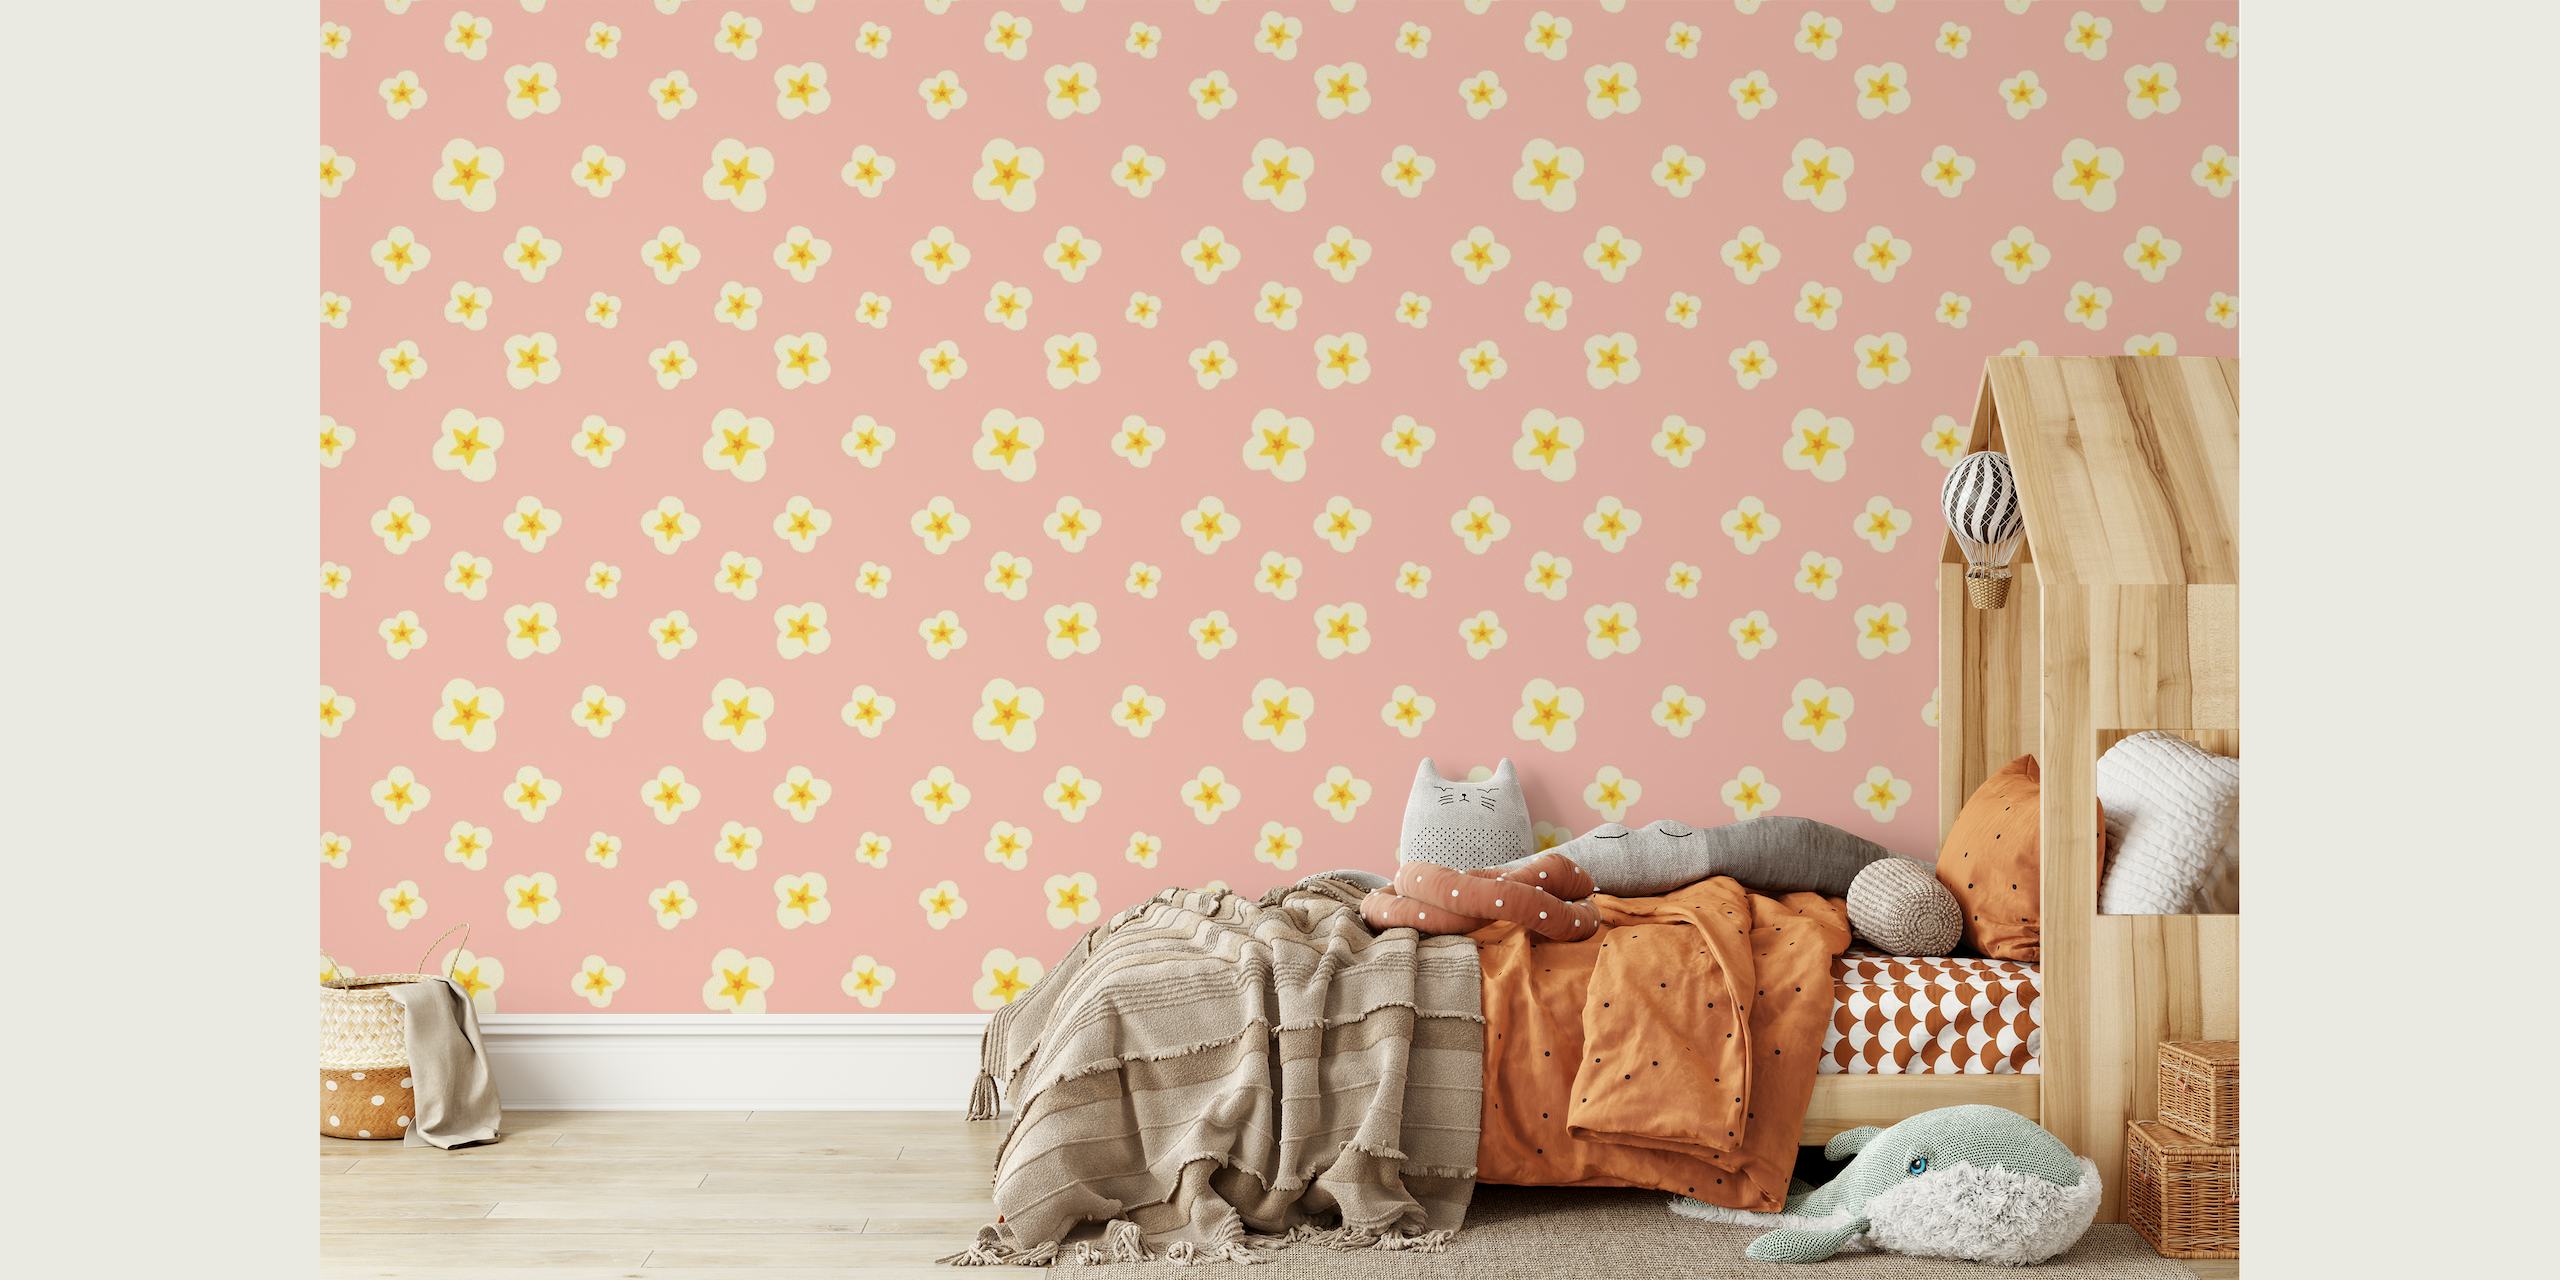 Pastel pink wall mural with daffodil pattern for home decor